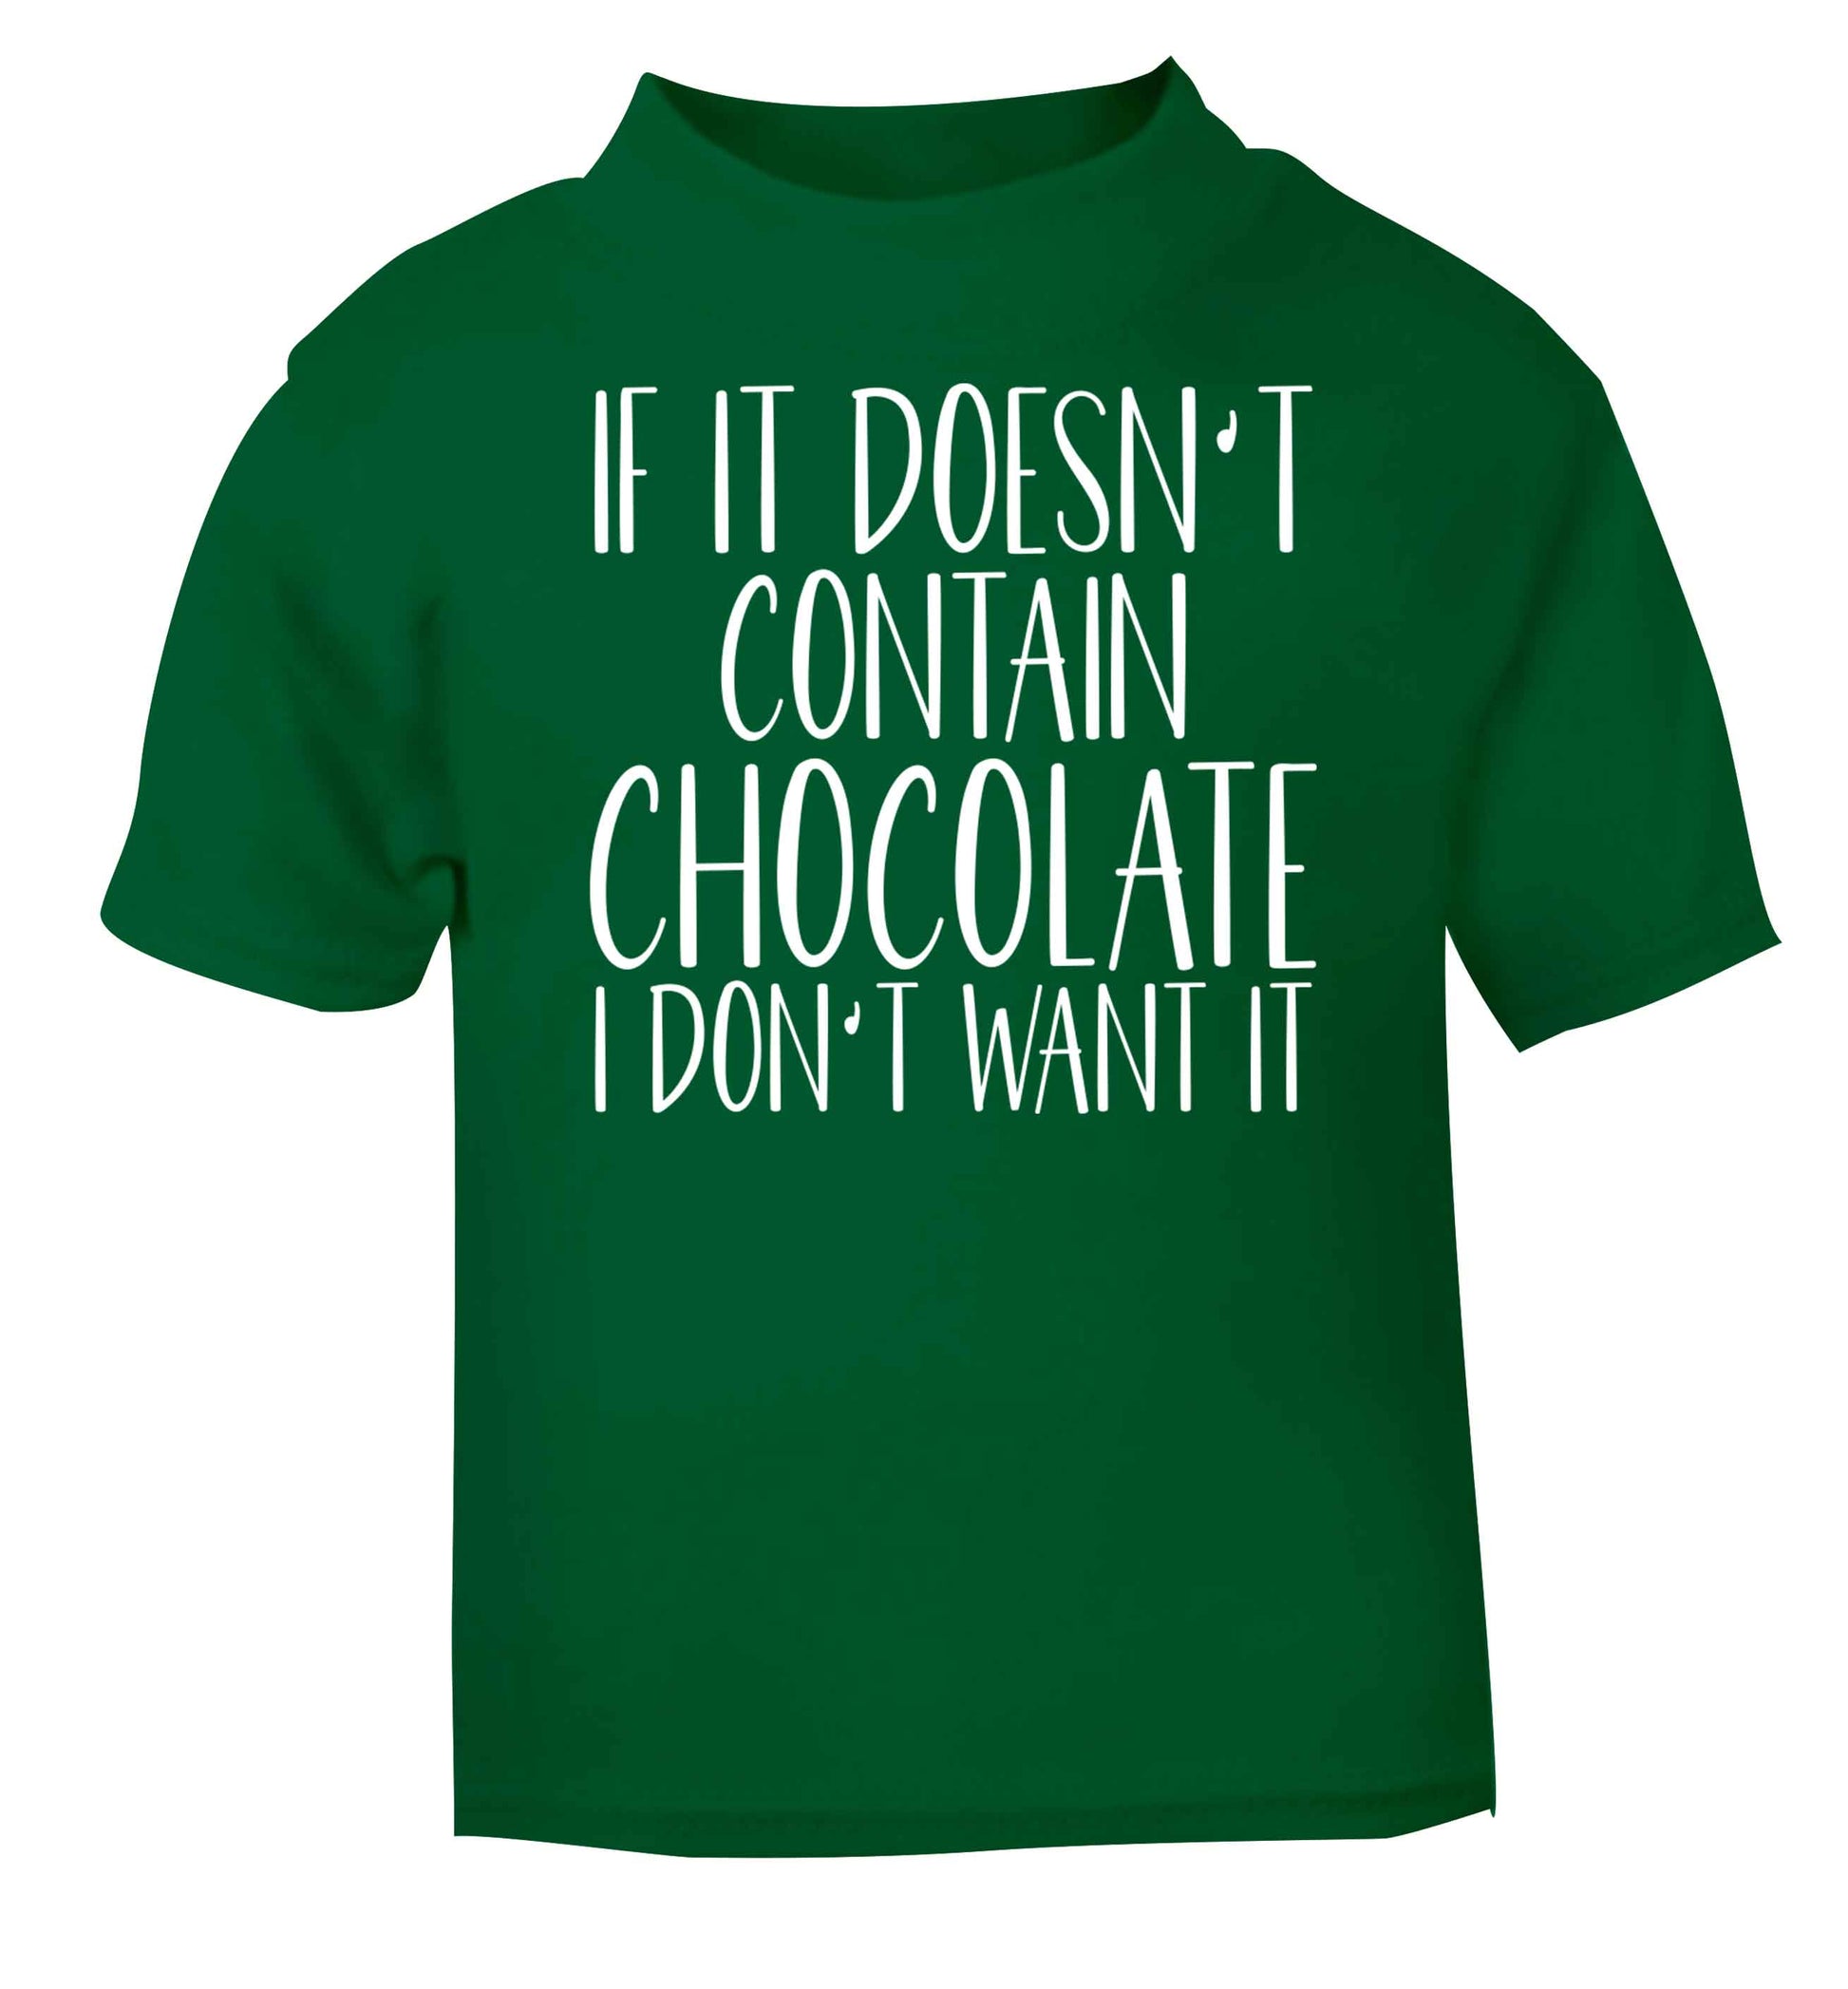 If it doesn't contain chocolate I don't want it green baby toddler Tshirt 2 Years